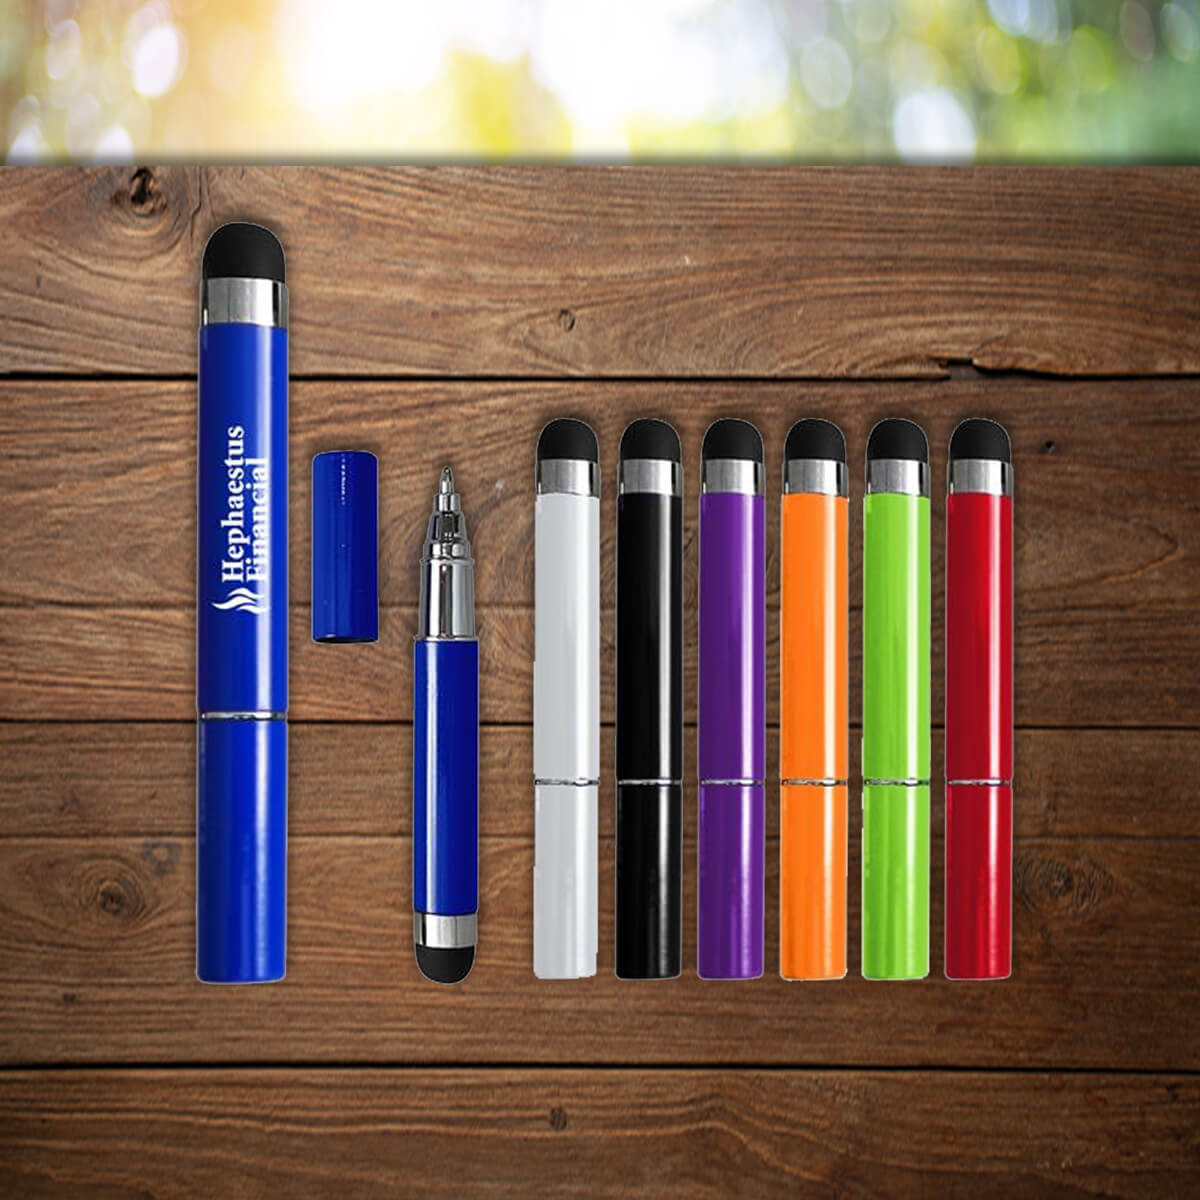 Miniature size color and imprint variety shown custom stylus pens promotional writing implements by curative printing